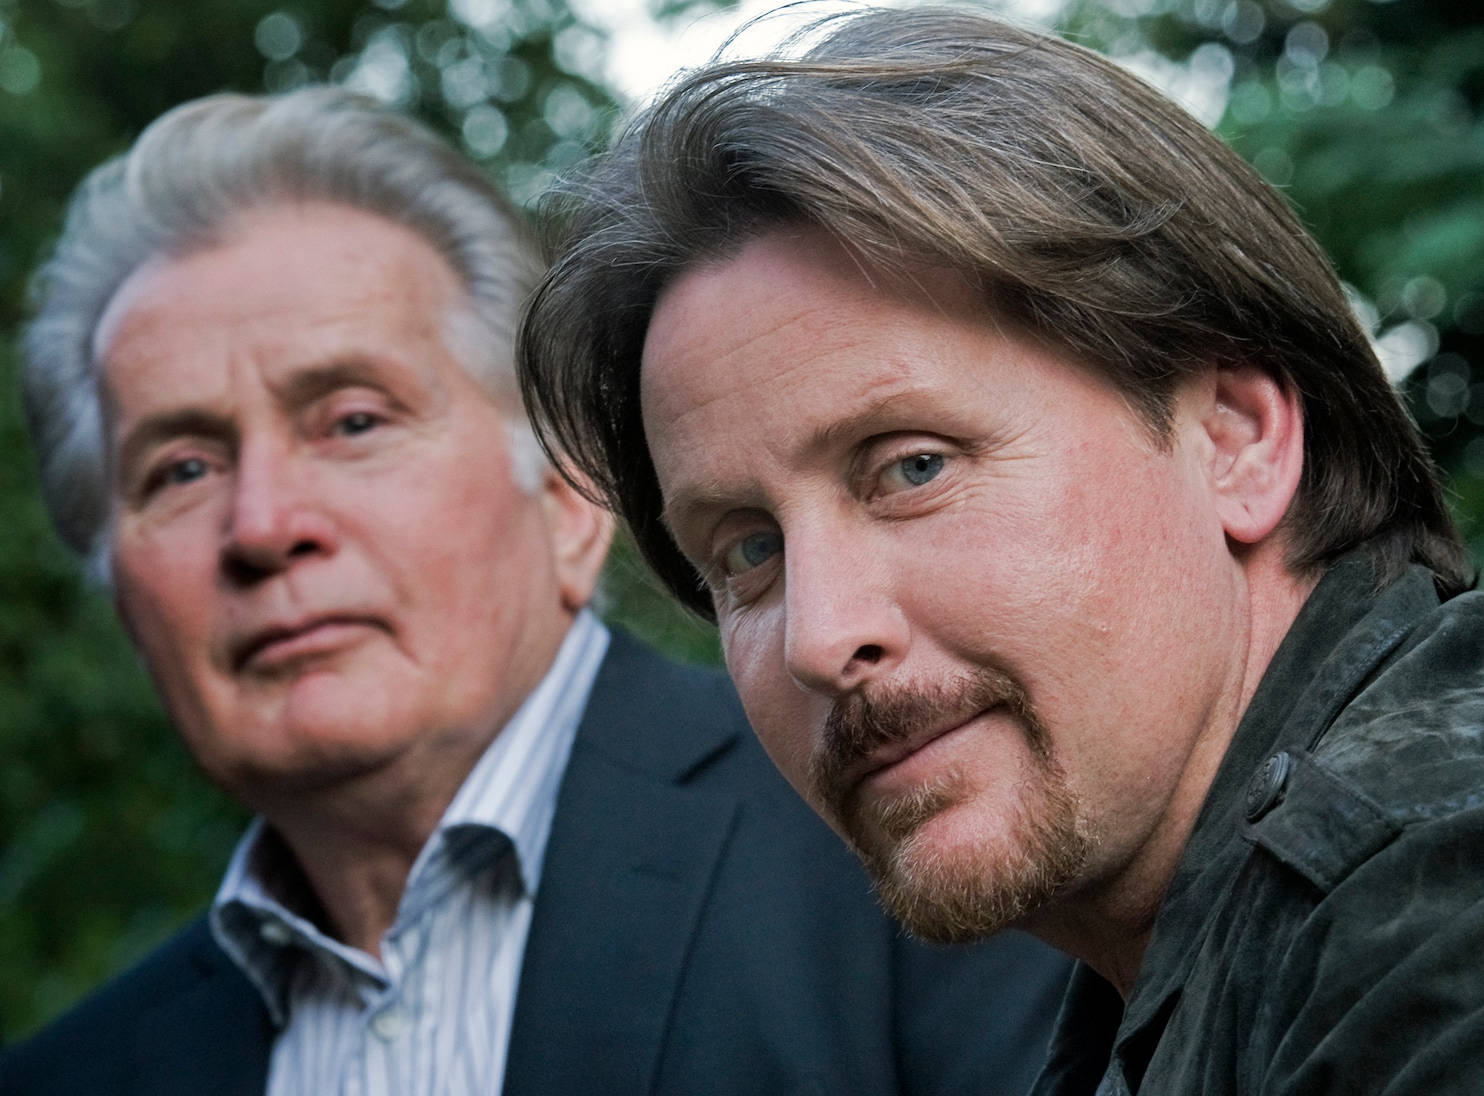 Emilio Estevez and Martin Sheen on an excursion in 'The Way' Wallpaper